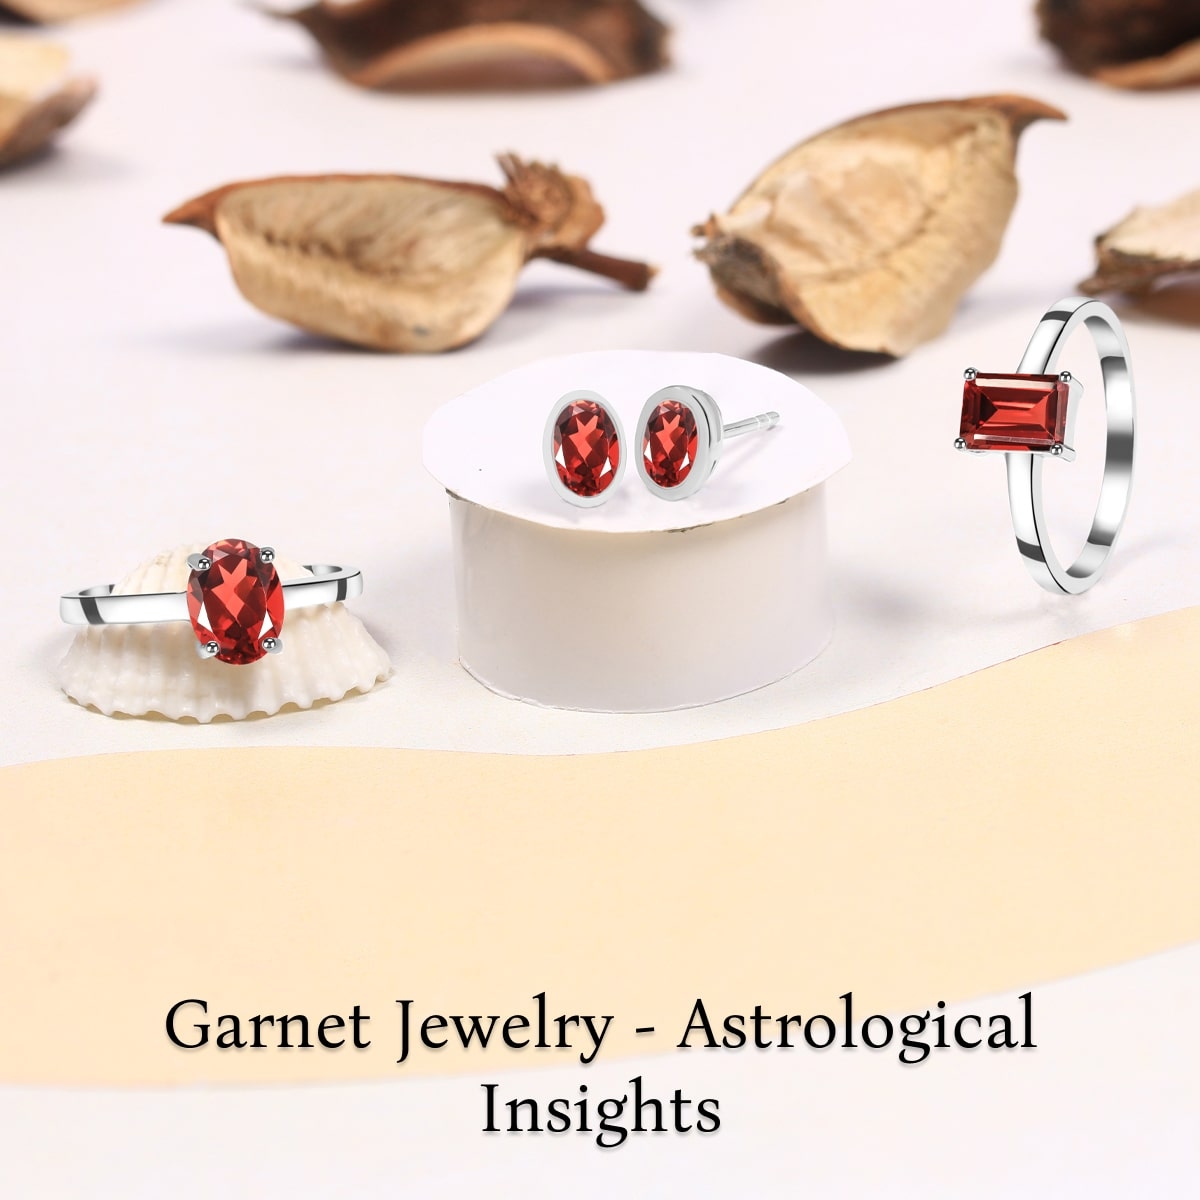 Astrology and Garnet Jewelry